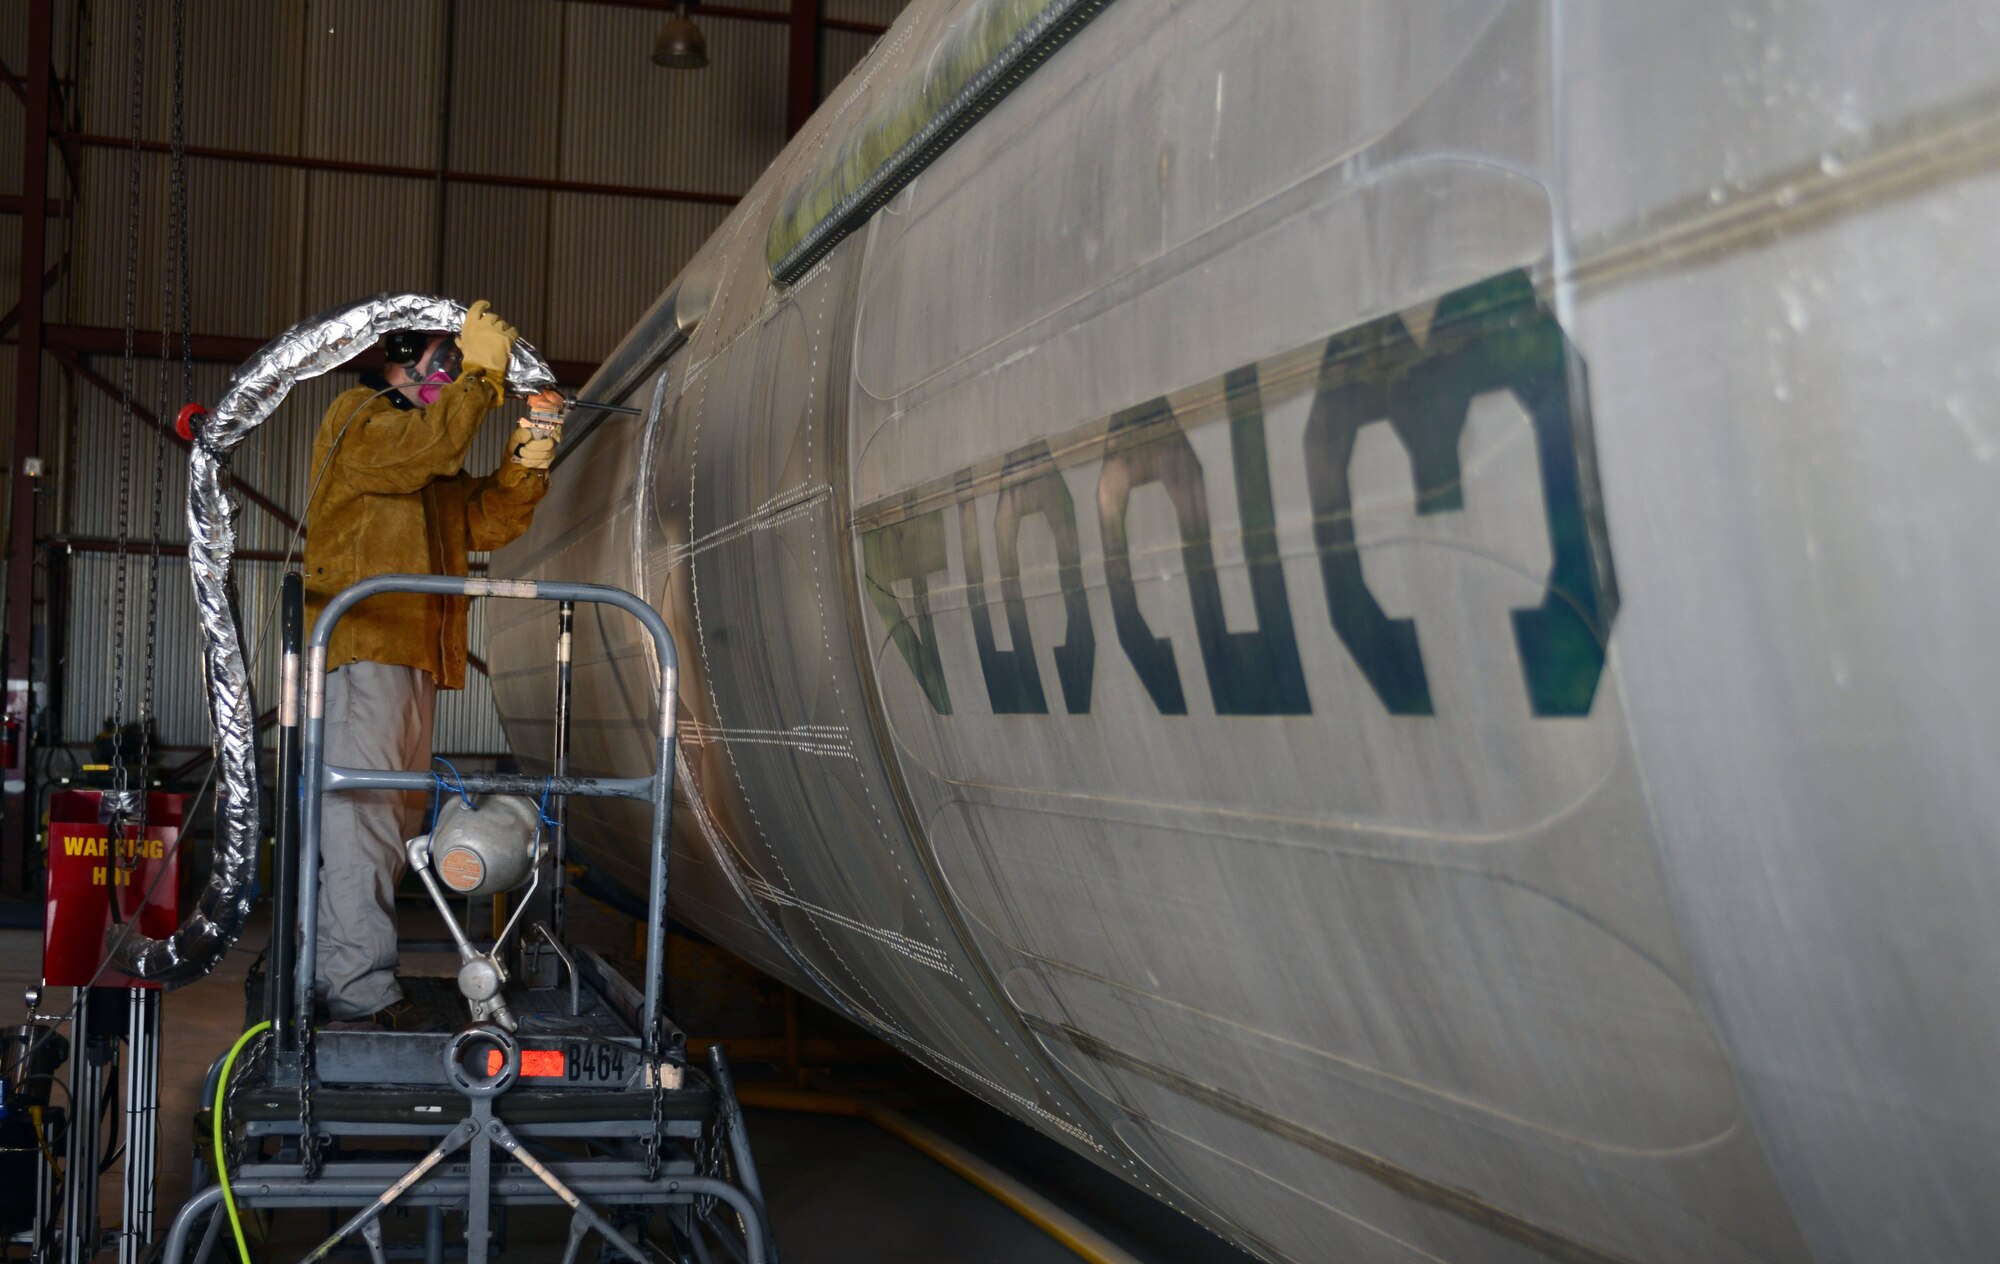 Dustin Blosmo, the chief engineer with VRC Metal Systems, repairs the side of a Martin Marietta HGM-25A Titan I with a mobile Cold Spray machine in Dock 43 at Ellsworth Air Force Base, S.D., June 22, 2017. Cold Spray is a technology that accelerates small particles of the substrate [whatever the material is made out of] to achieve a mechanical bond upon impact restoring the part back to the original specifications. (U.S. Air Force photo by Airman 1st Class Donald C. Knechtel)